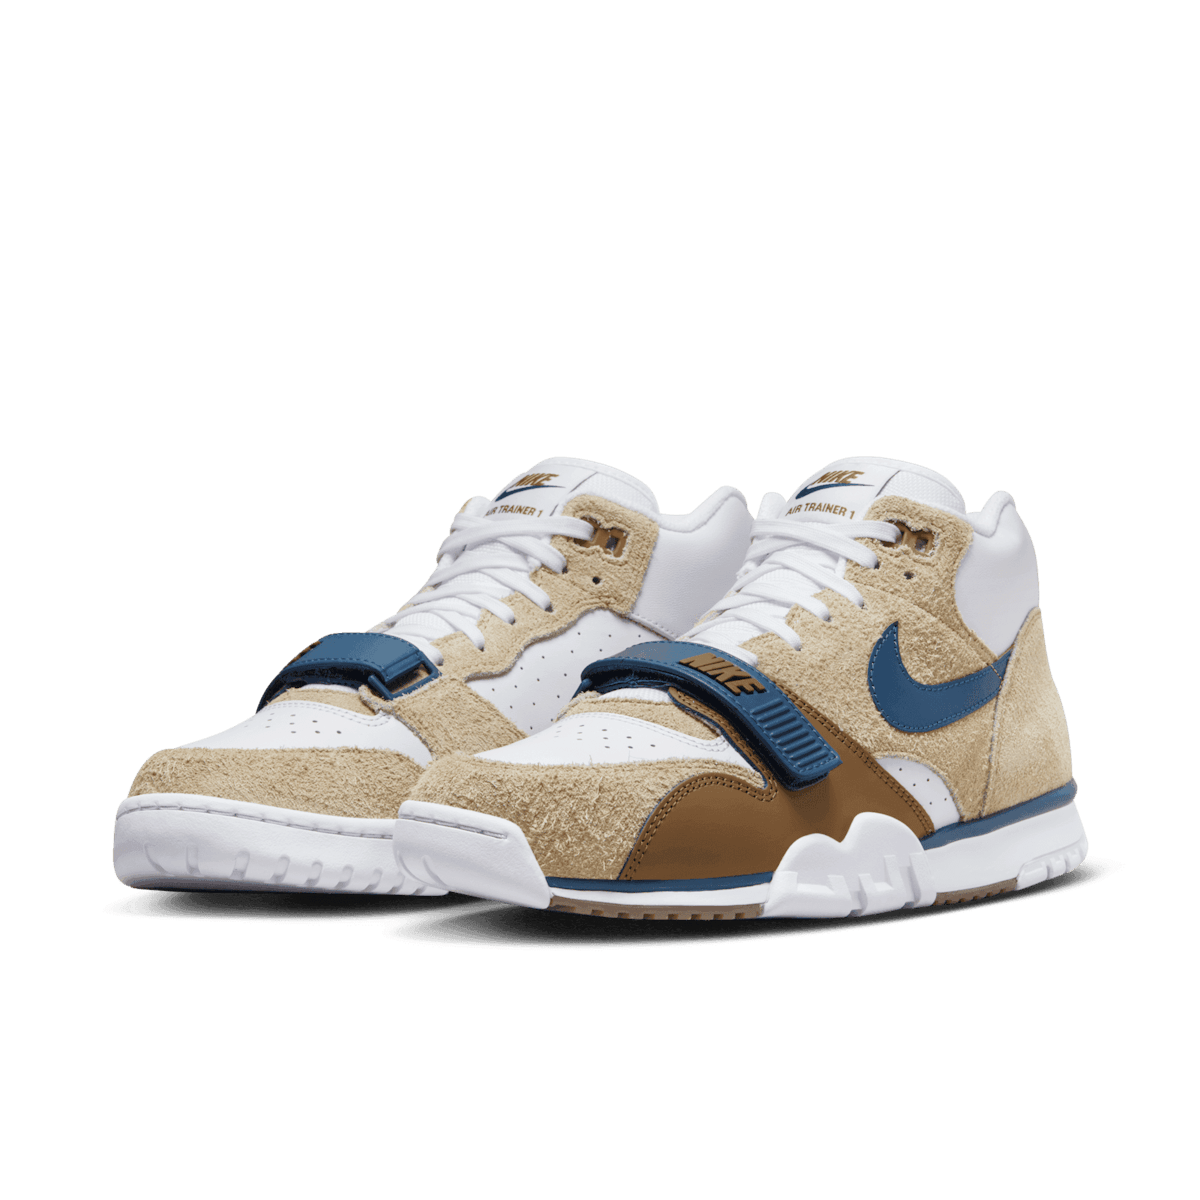 Nike Air Trainer 1 Ale Brown Angle 2